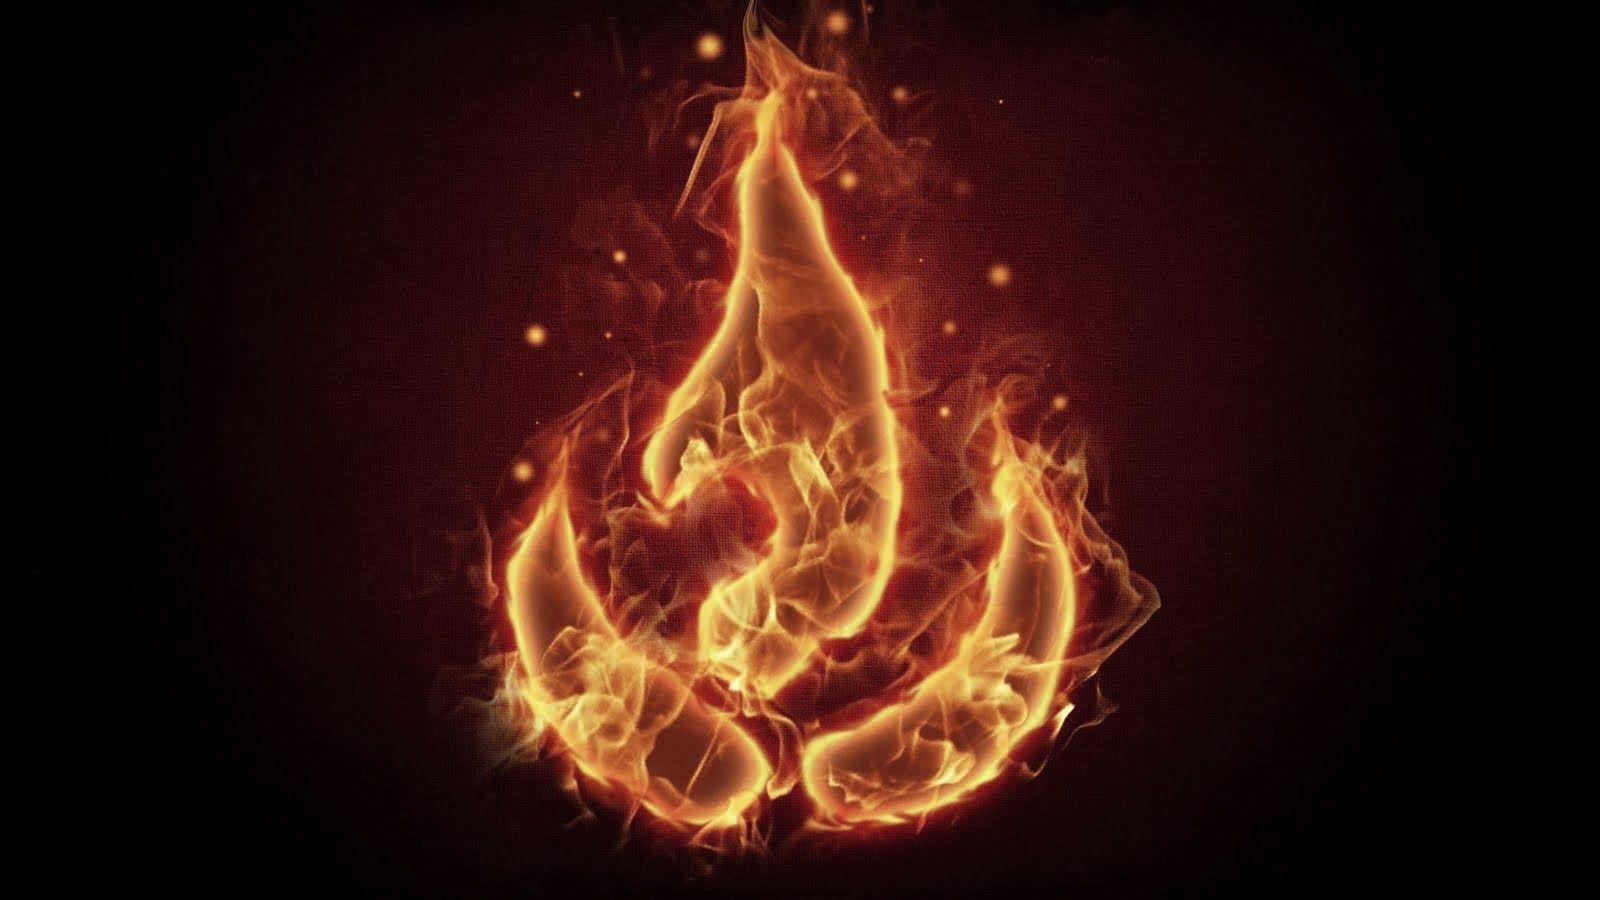 Anime fire, flame effect, cartoon png | PNGEgg